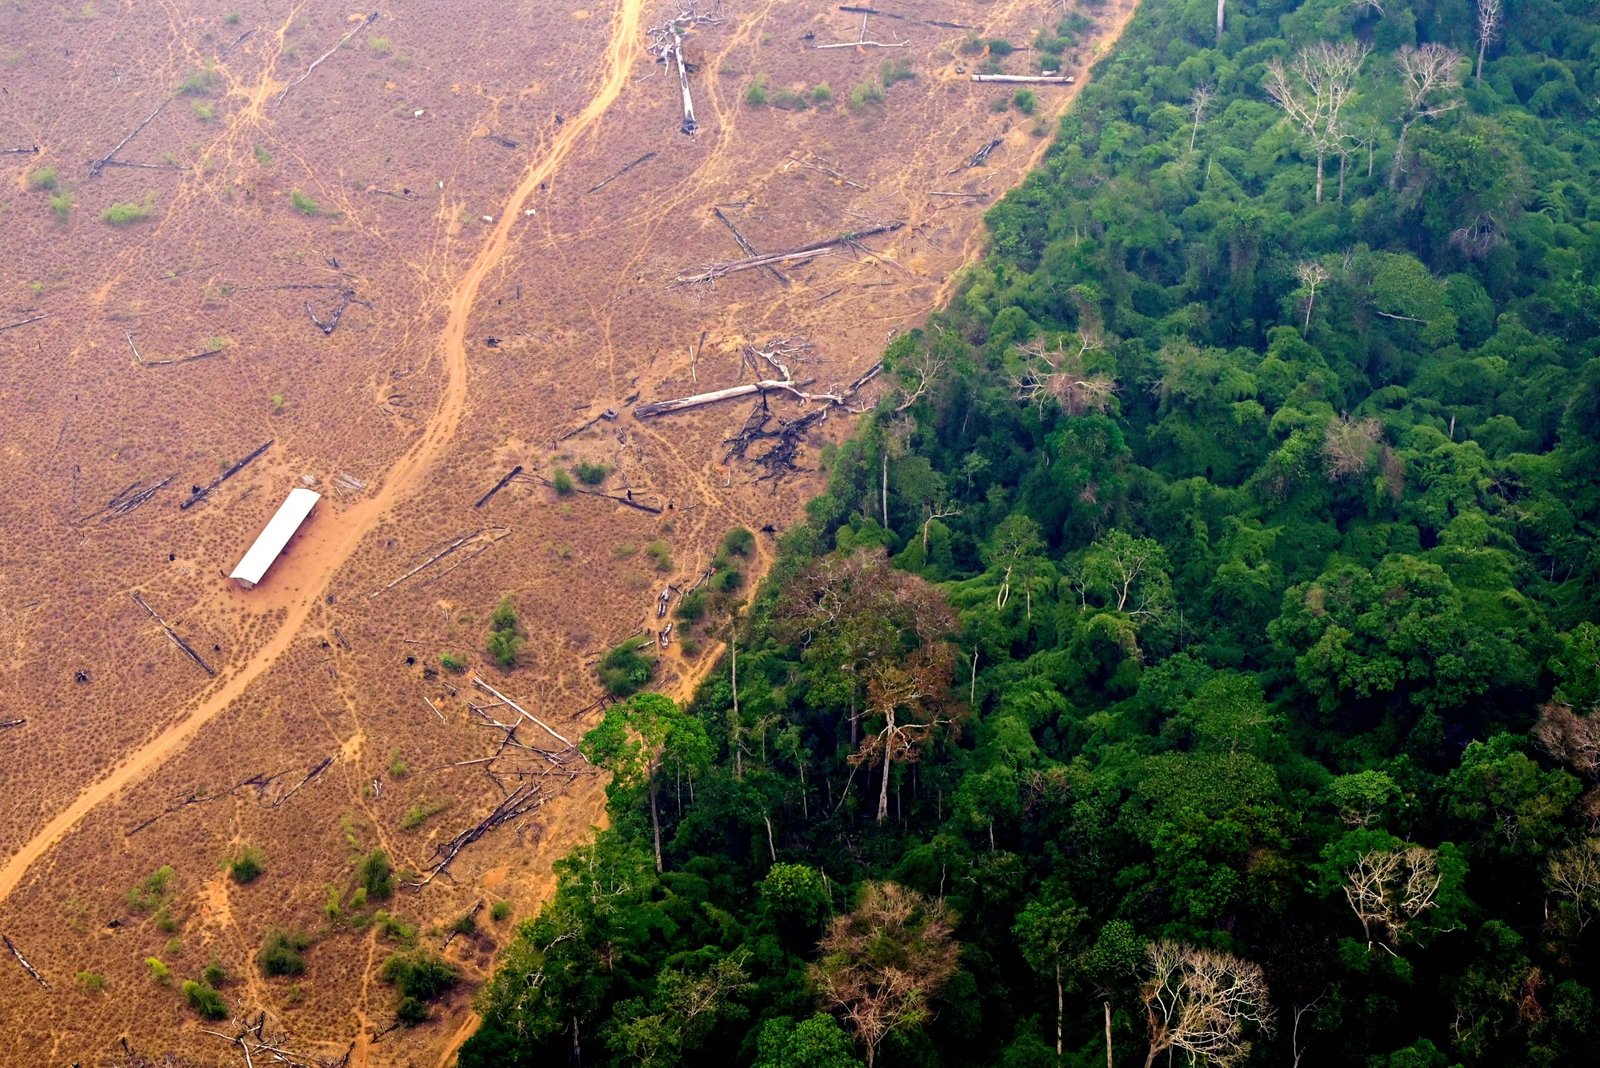 2023 Sees Tropical Forests Disappearing at Alarming Rate